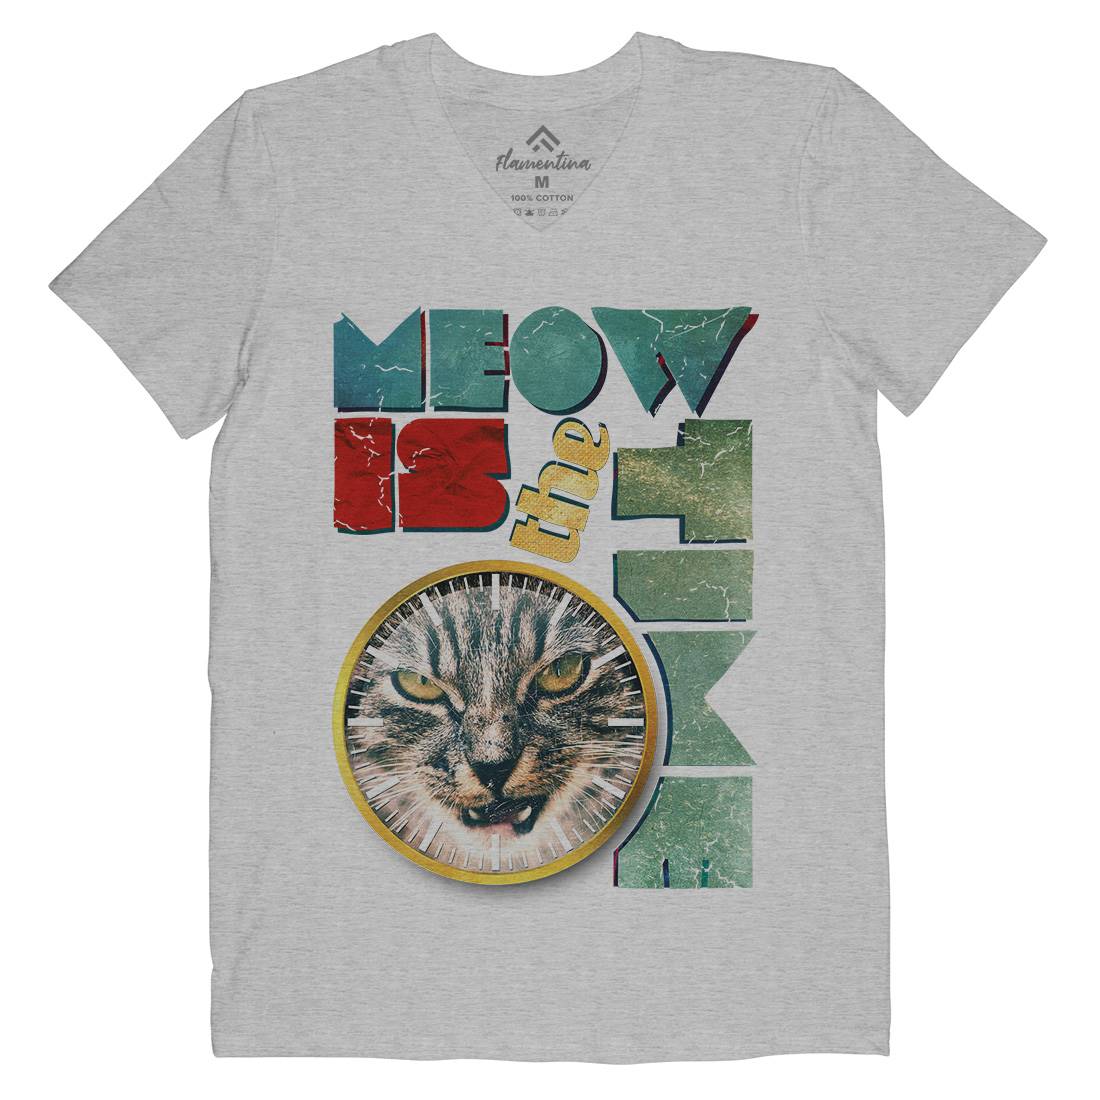 Meow Is The Time Mens V-Neck T-Shirt Animals A876